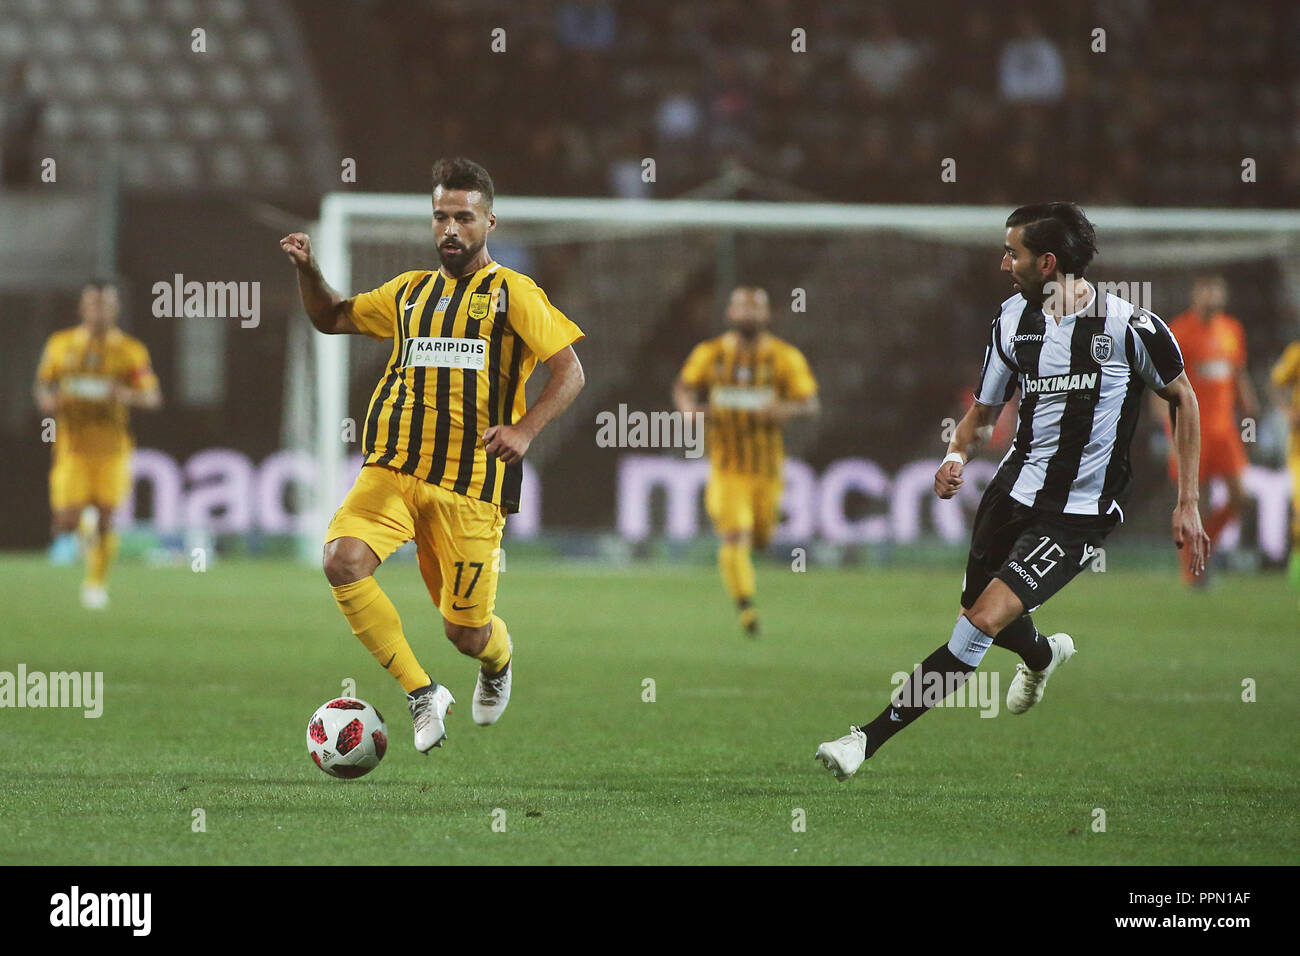 Thessaloniki, Greece. 26th Sep, 2018. PAOK's Jose Angel Crespo (Right) duels for the ball with ARIS's Bruno Alexandre Vilela Gama (Left) during a Cup match between PAOK and ARIS. Greek Football Cup game between PAOK FC and ARIS FC, with the game ending with a score of 1-1. Credit: Giannis Papanikos/ZUMA Wire/Alamy Live News Stock Photo